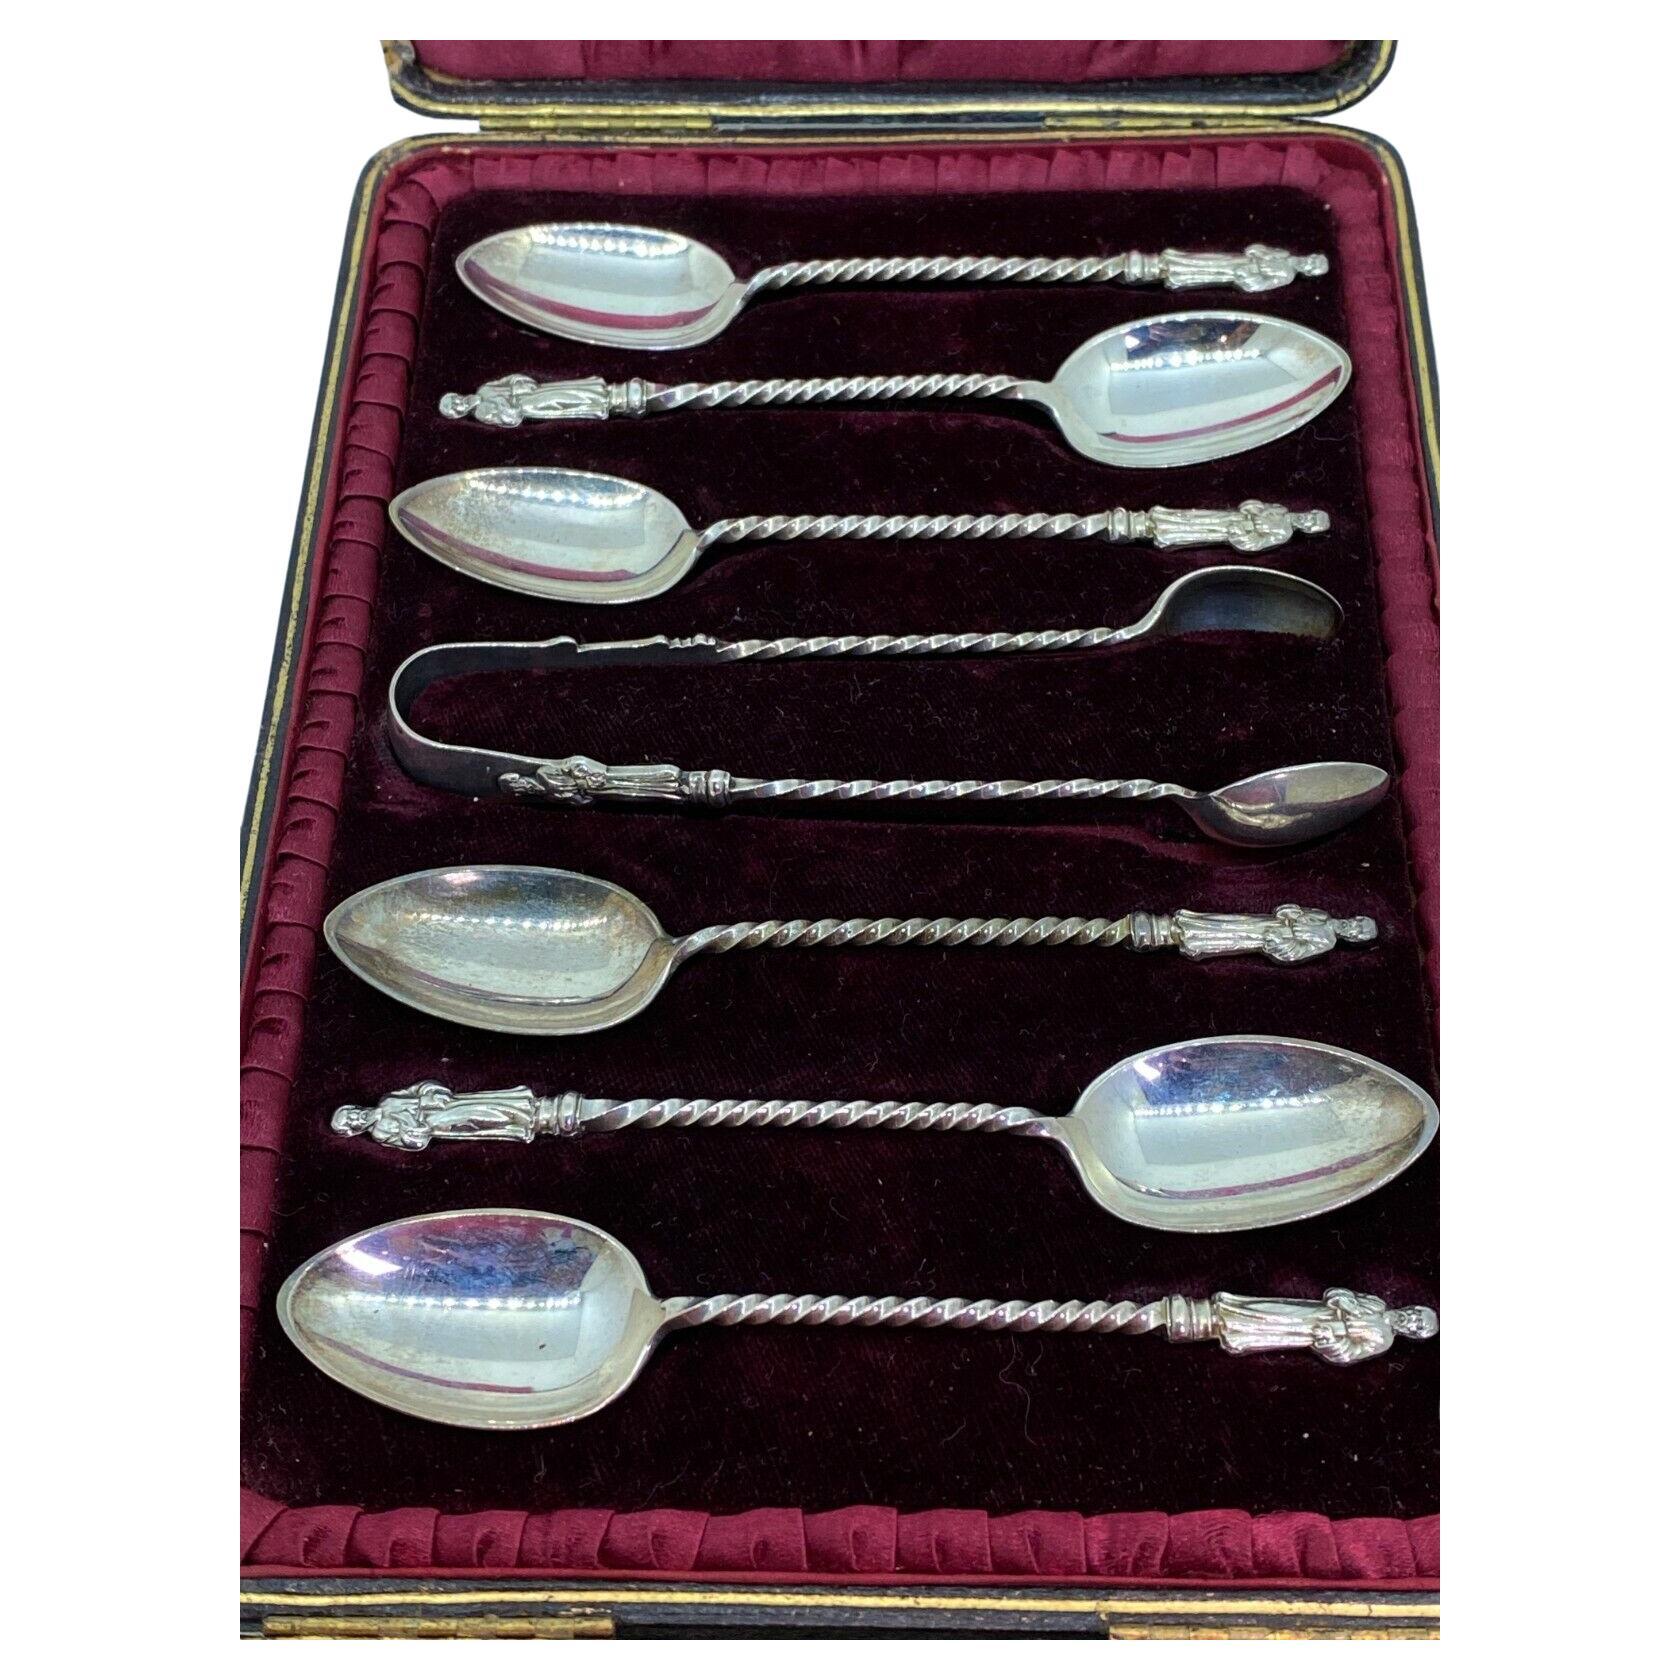 What is the rarest silver spoon?